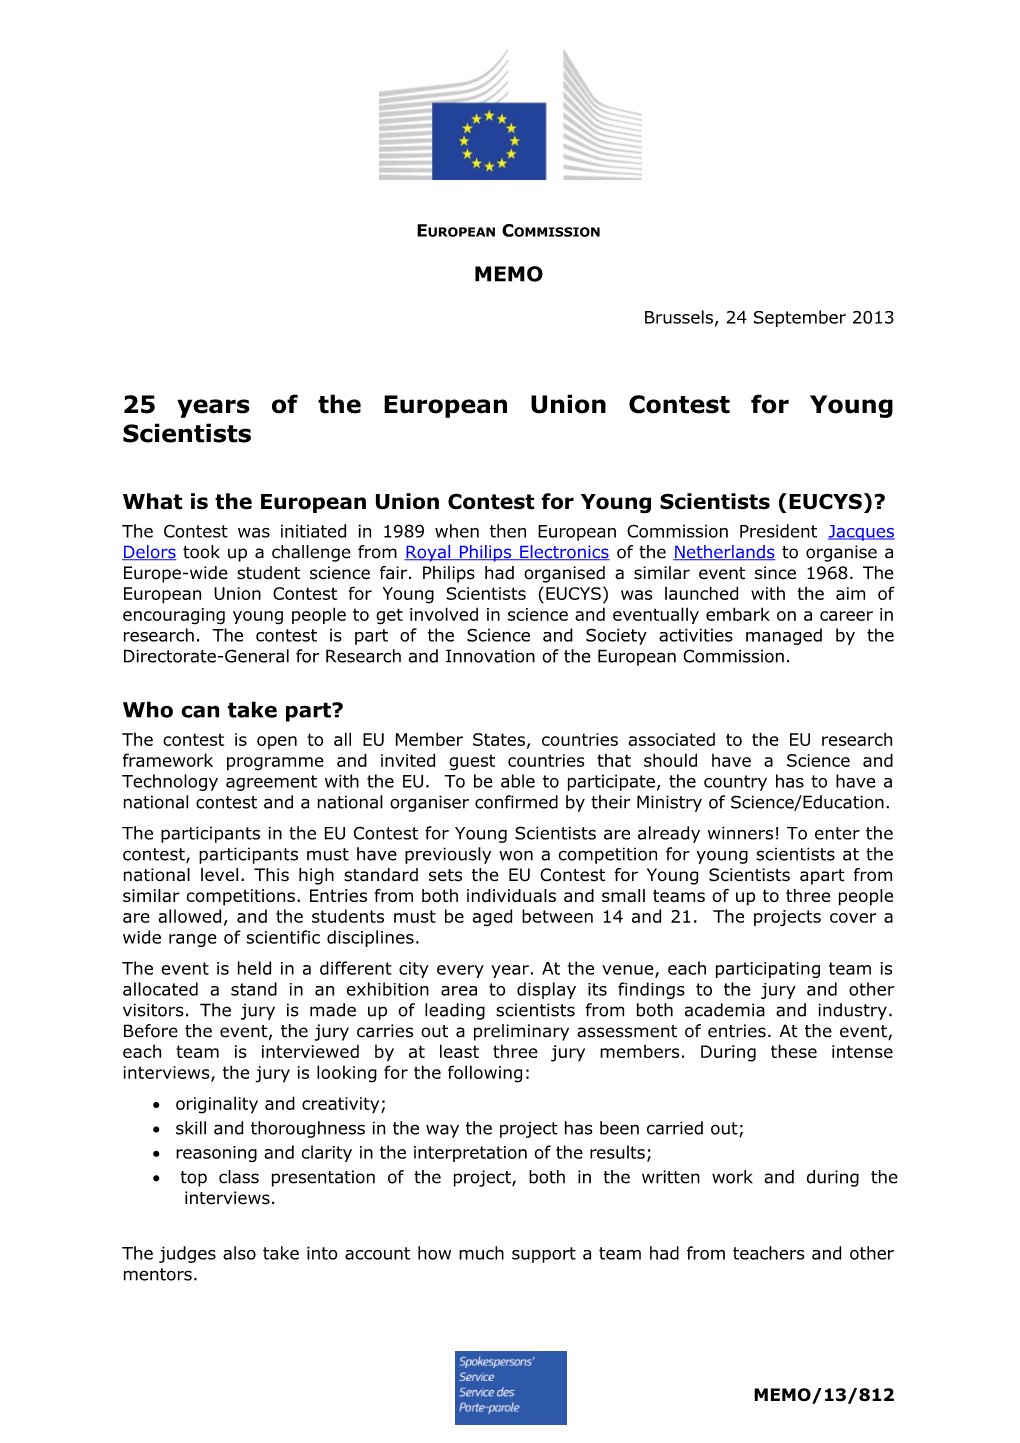 25 Years of the European Union Contest for Young Scientists